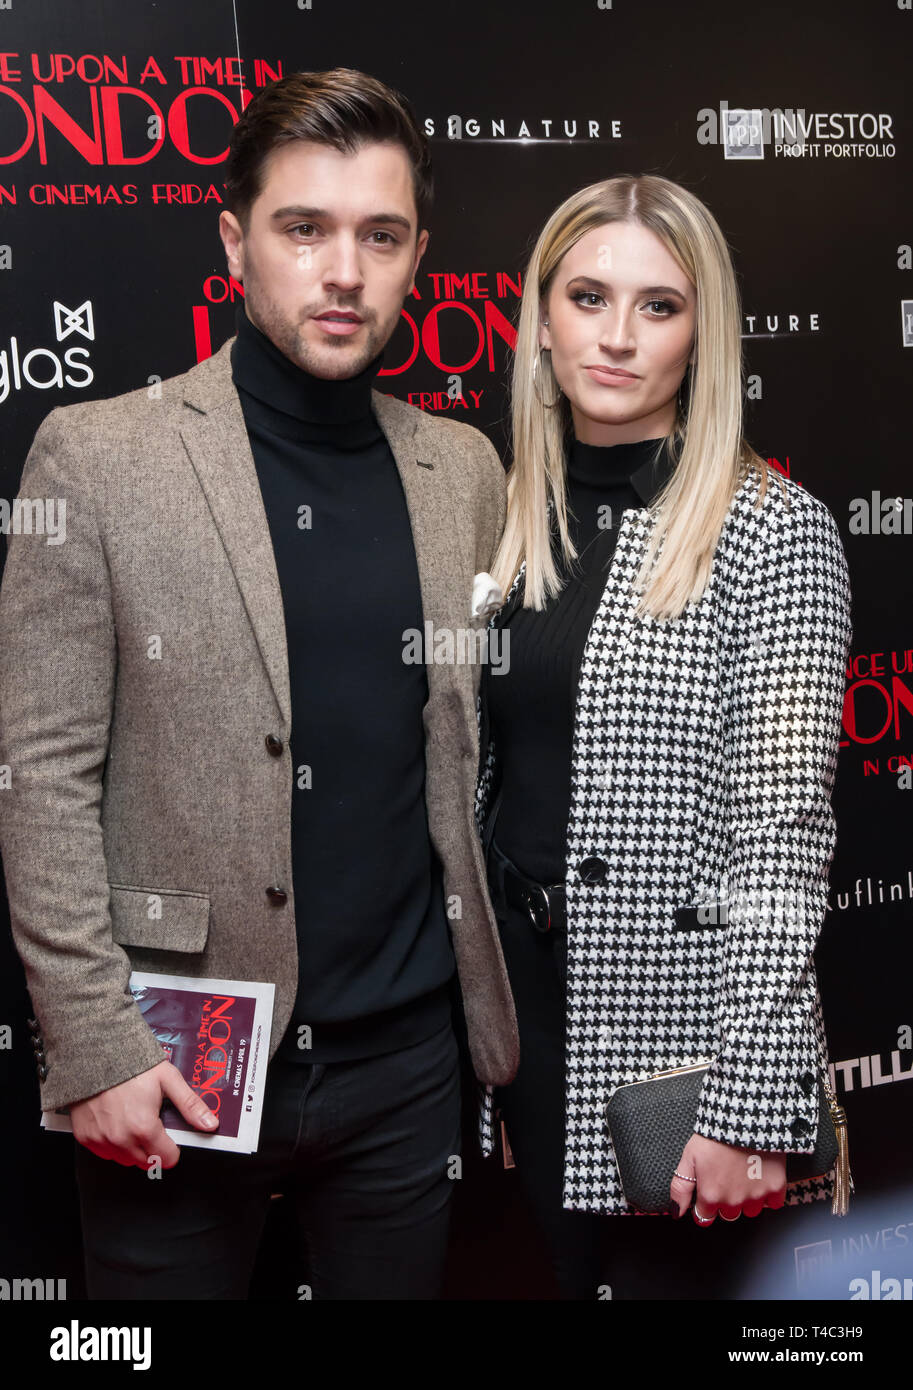 London, UK. 15th Apr, 2019. JJ Hamblett Arrivals at Once Upon a Time in London - London premiere of the rise and fall of a nationwide criminal empire that paved the way for notorious London gangsters the Kray Twins and the Richardsons at The Troxy 490 Commercial Road, on 15 April 2019, London, UK. Credit: Picture Capital/Alamy Live News Stock Photo